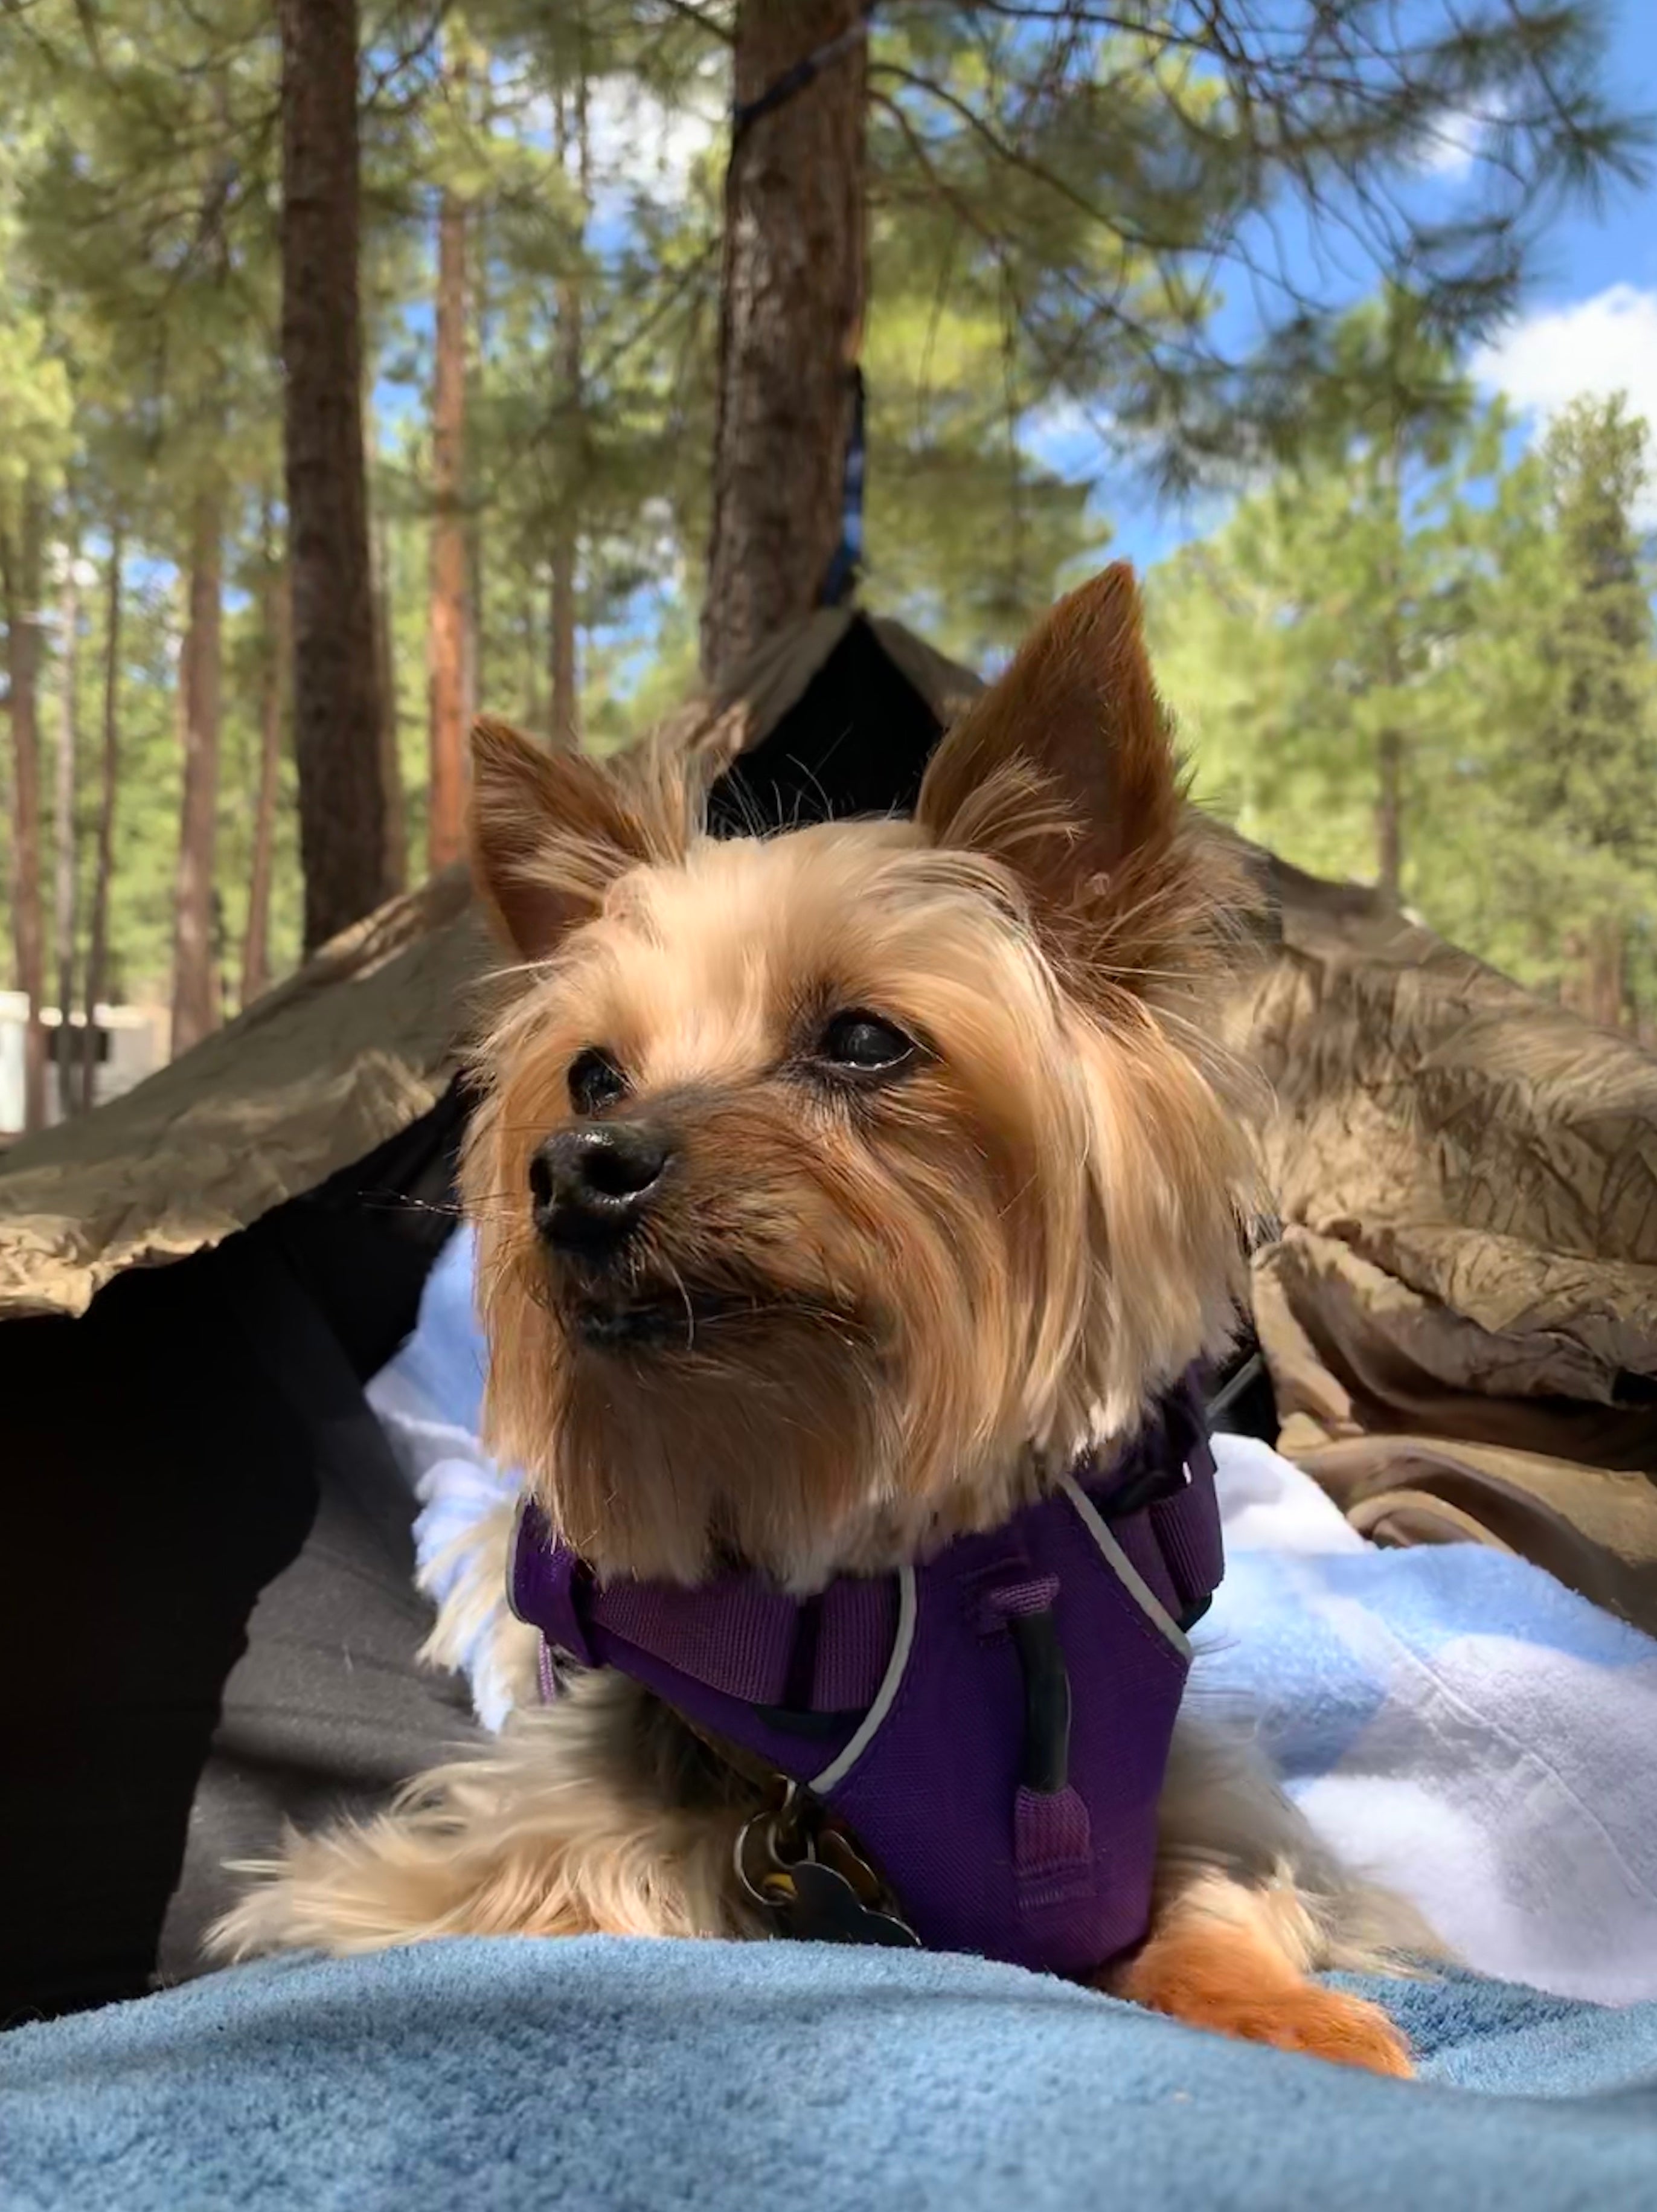 Camping pup, just relaxing in the hammock